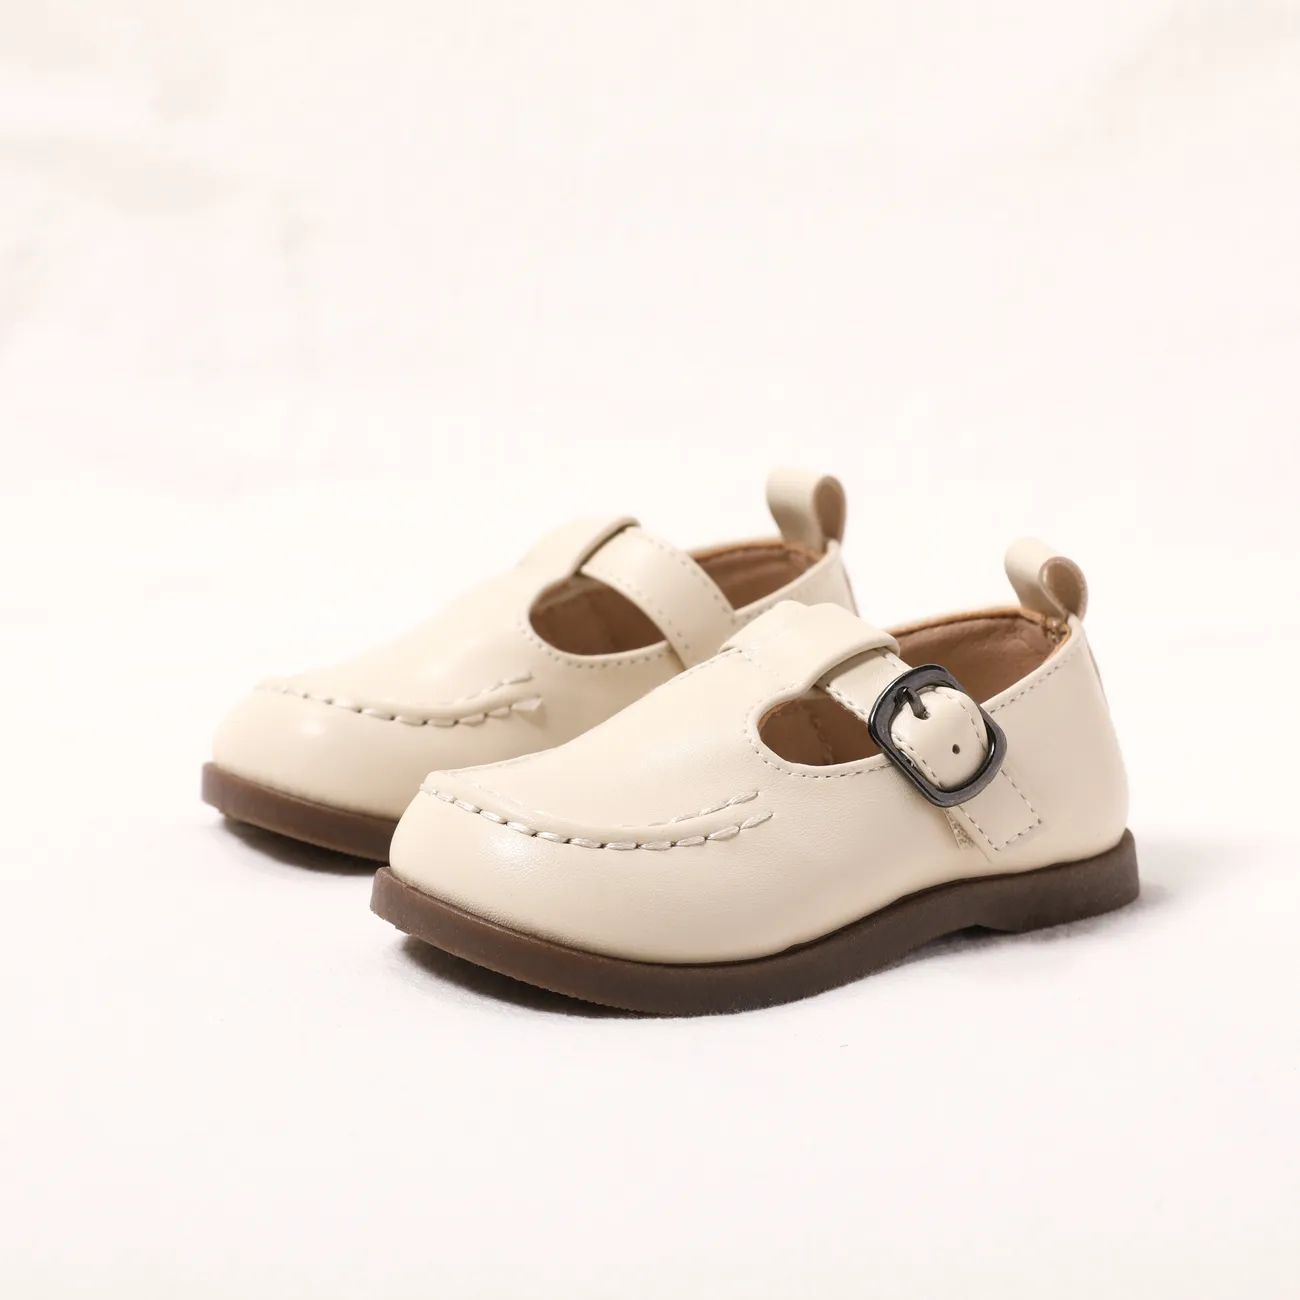 Toddler/Kids Girl Casual Velcro Leather Shoes White big image 1